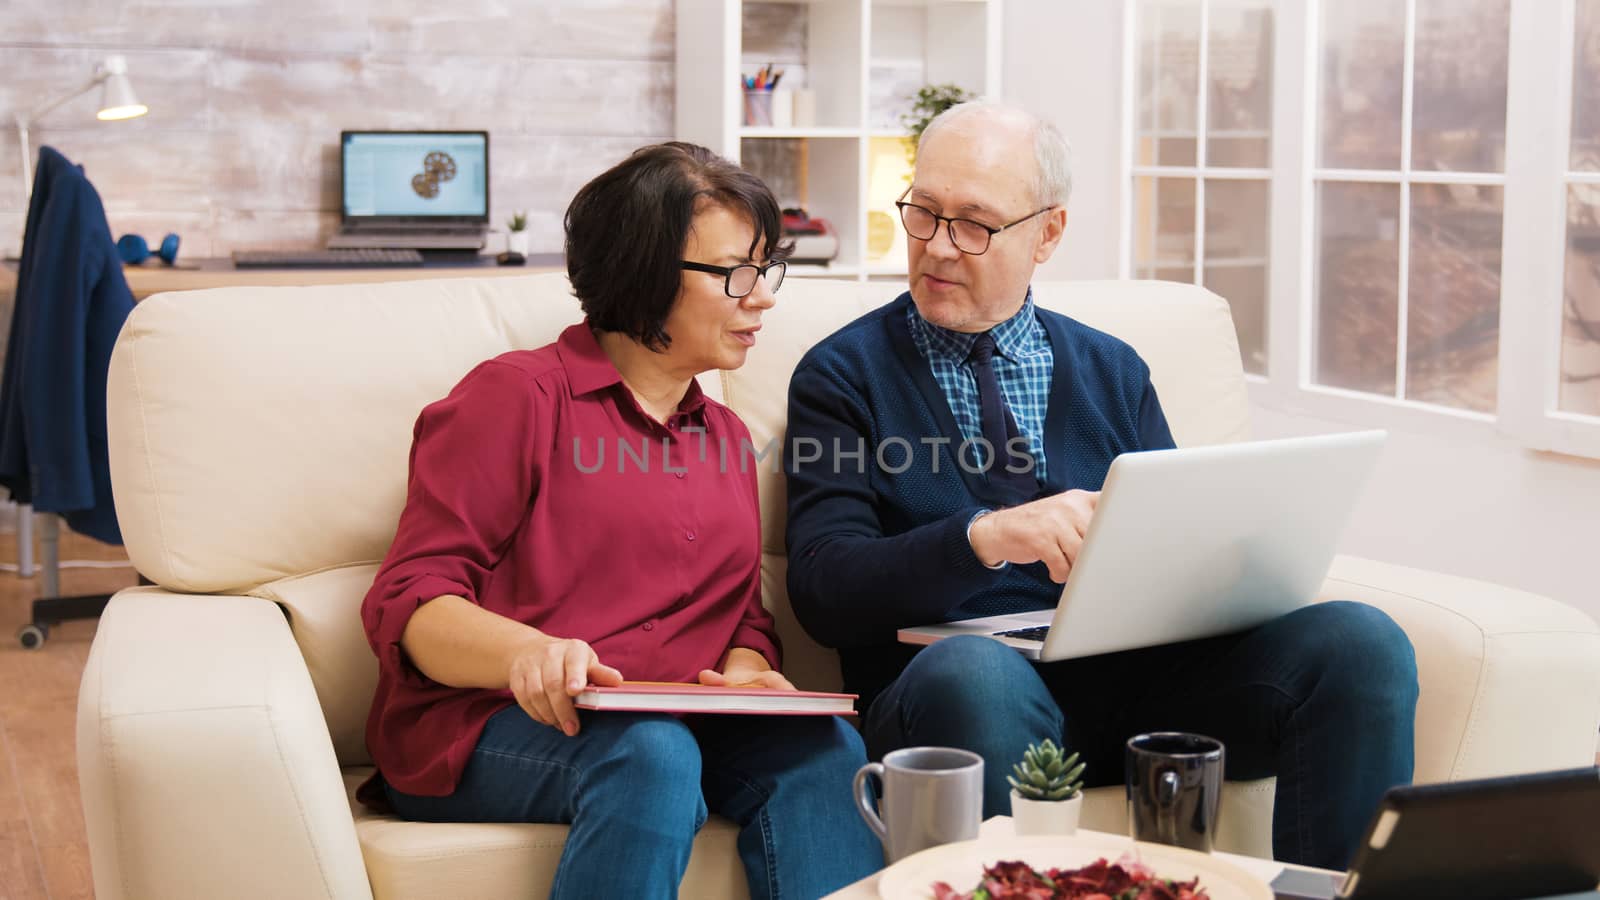 Elderly age couple using laptop while sitting on sofa in living room. Elderly woman taking a sip of coffee.